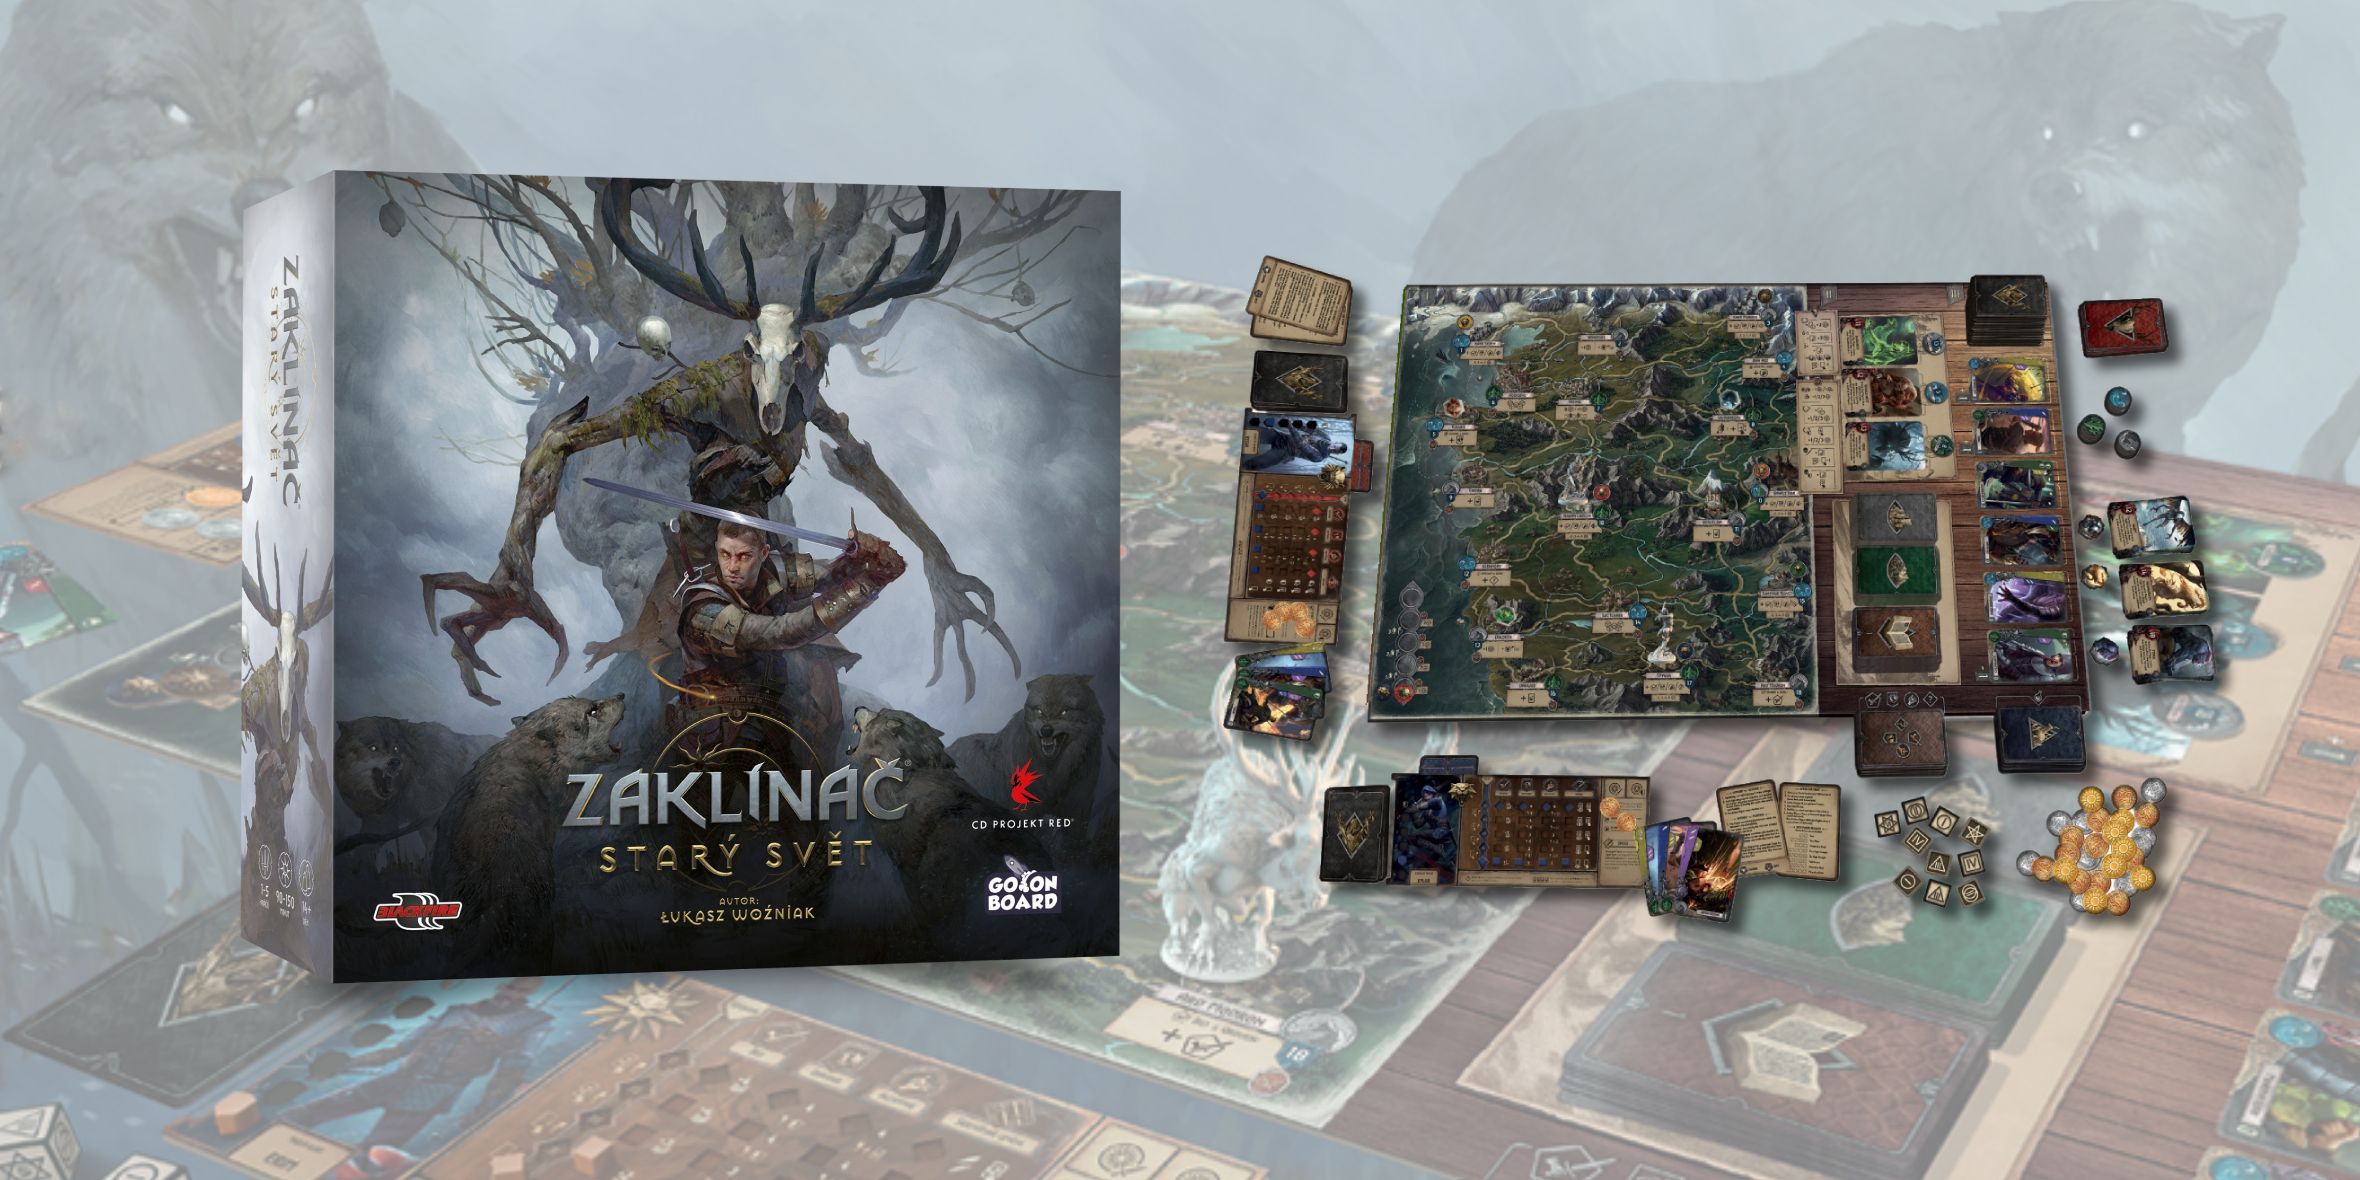 The fantasy board game The Witcher: The Old World has arrived in Czech stores